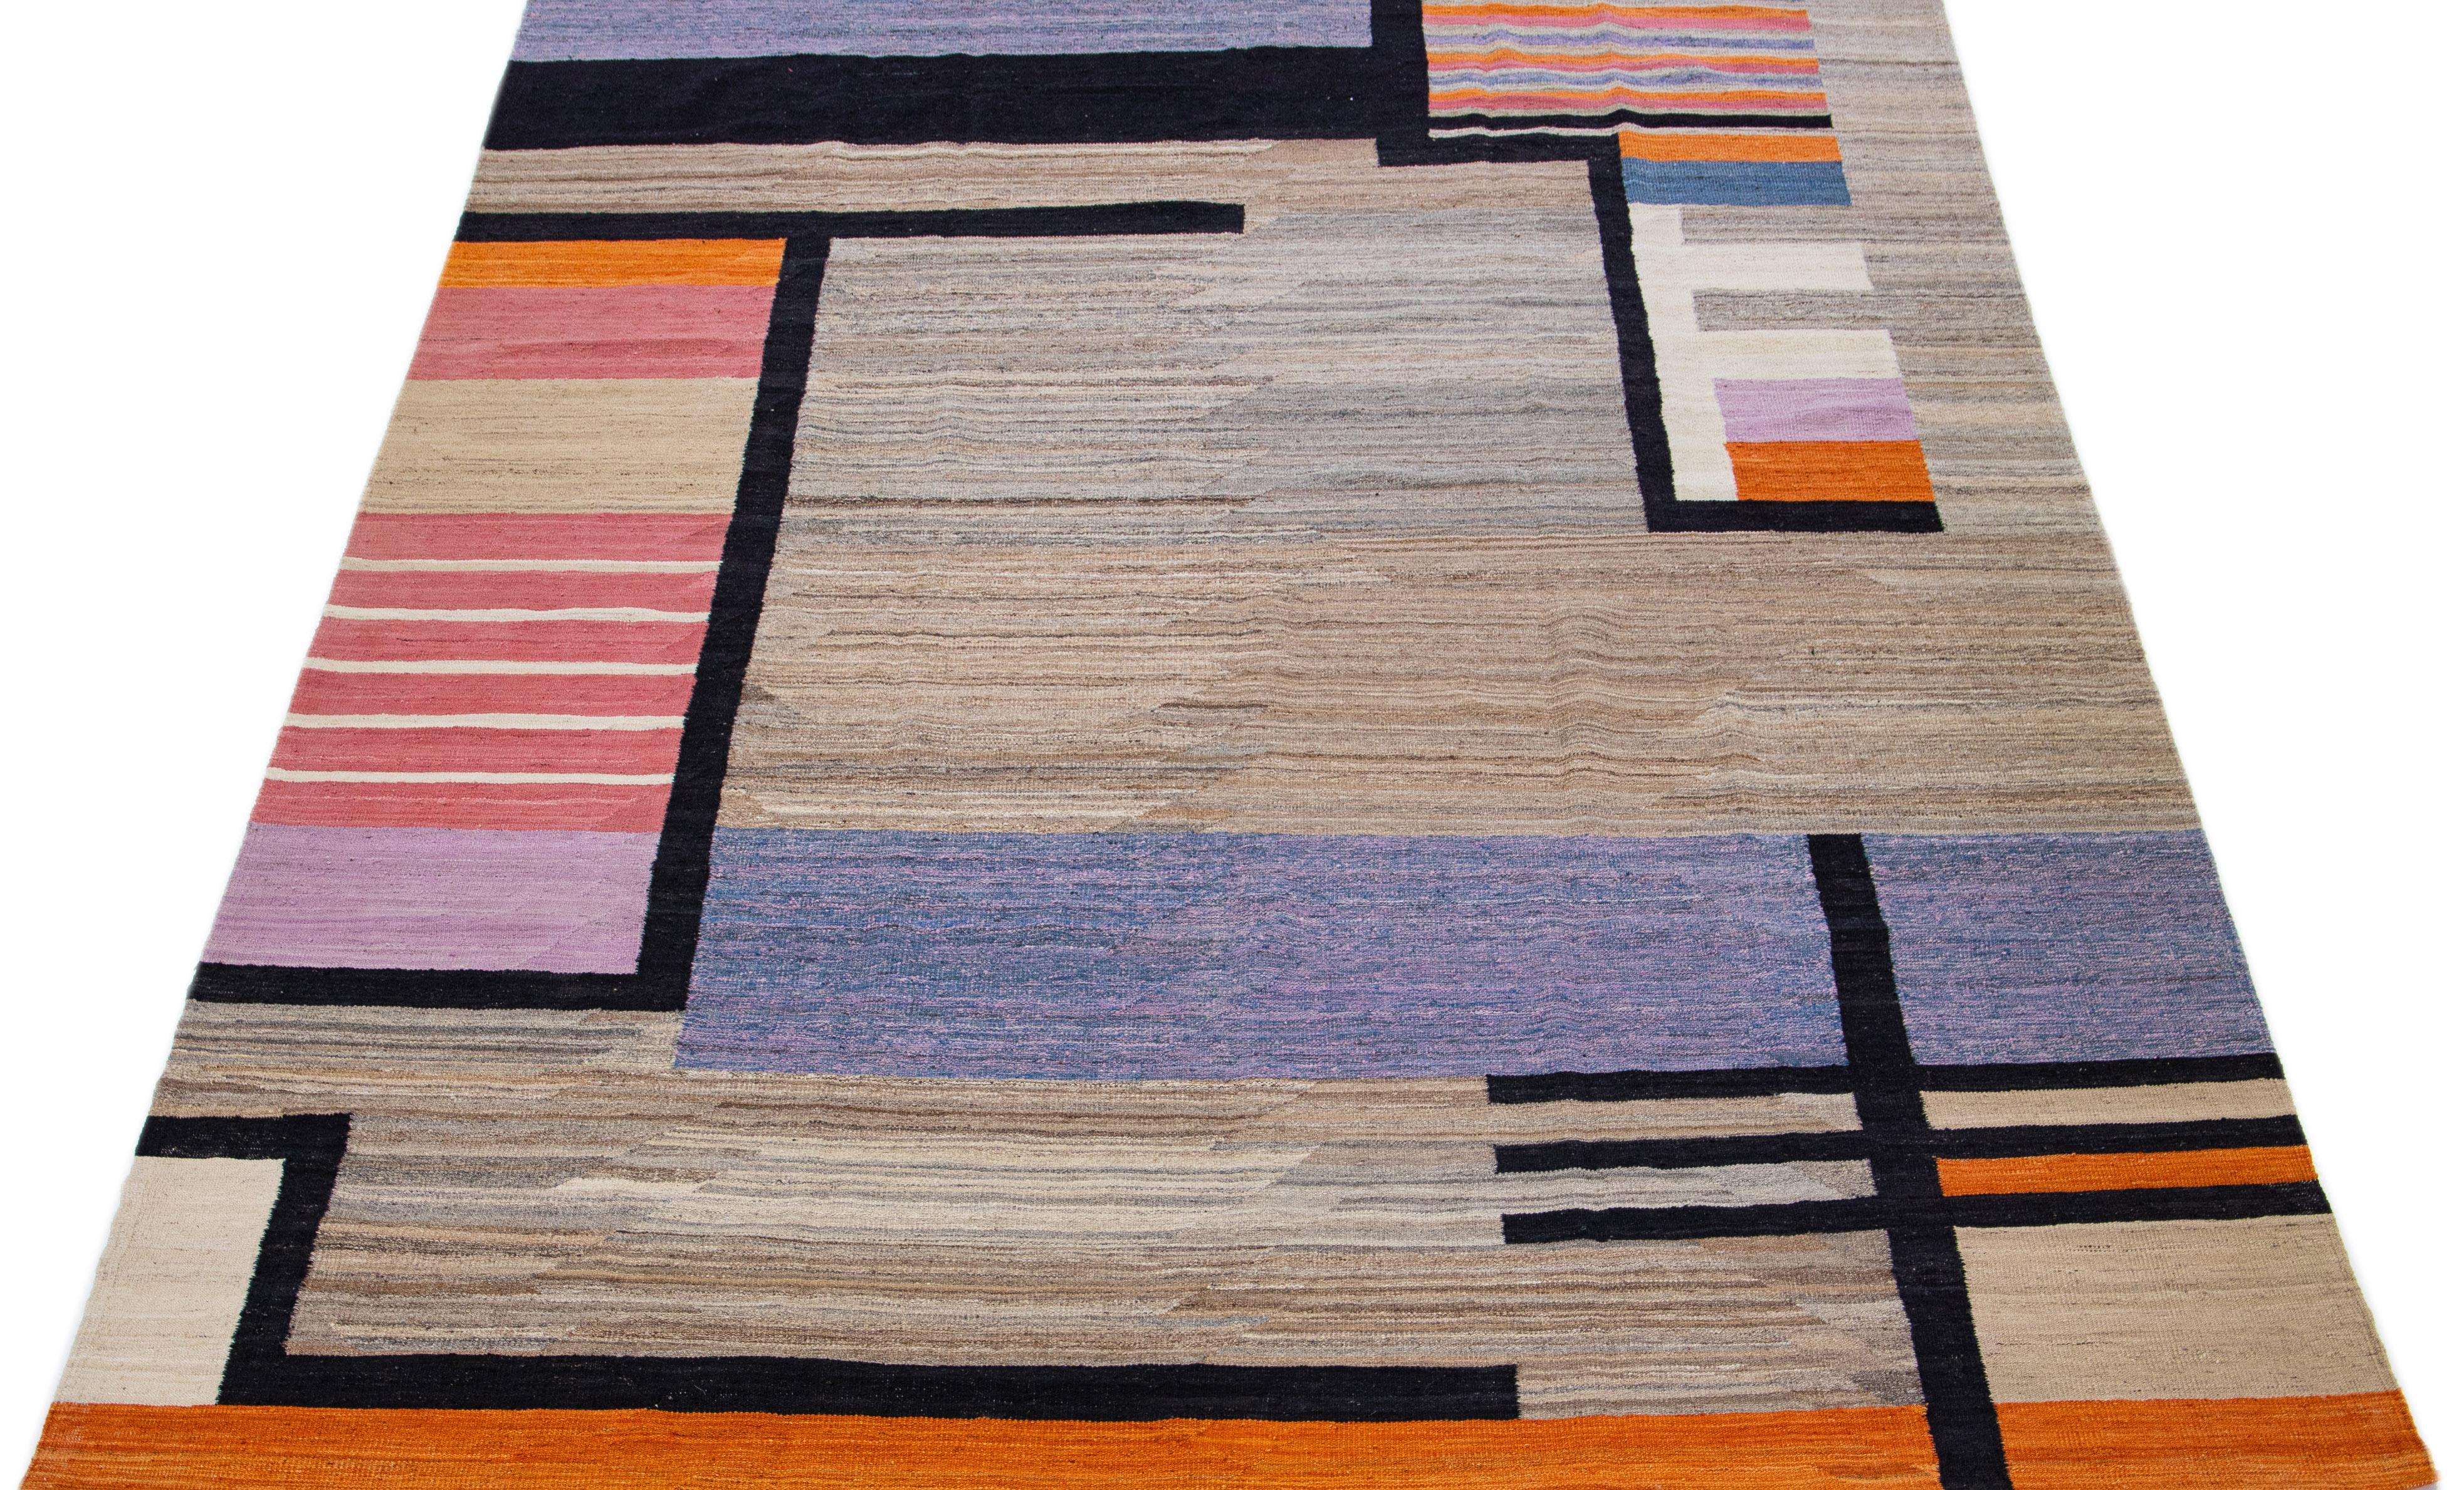 This Deco flatweave wool rug exhibits a captivating brown field with orange, black, and purple accents, creating a contemporary and aesthetically-pleasing effect. Its intricate, vibrant design combines to create a modern centerpiece that will add